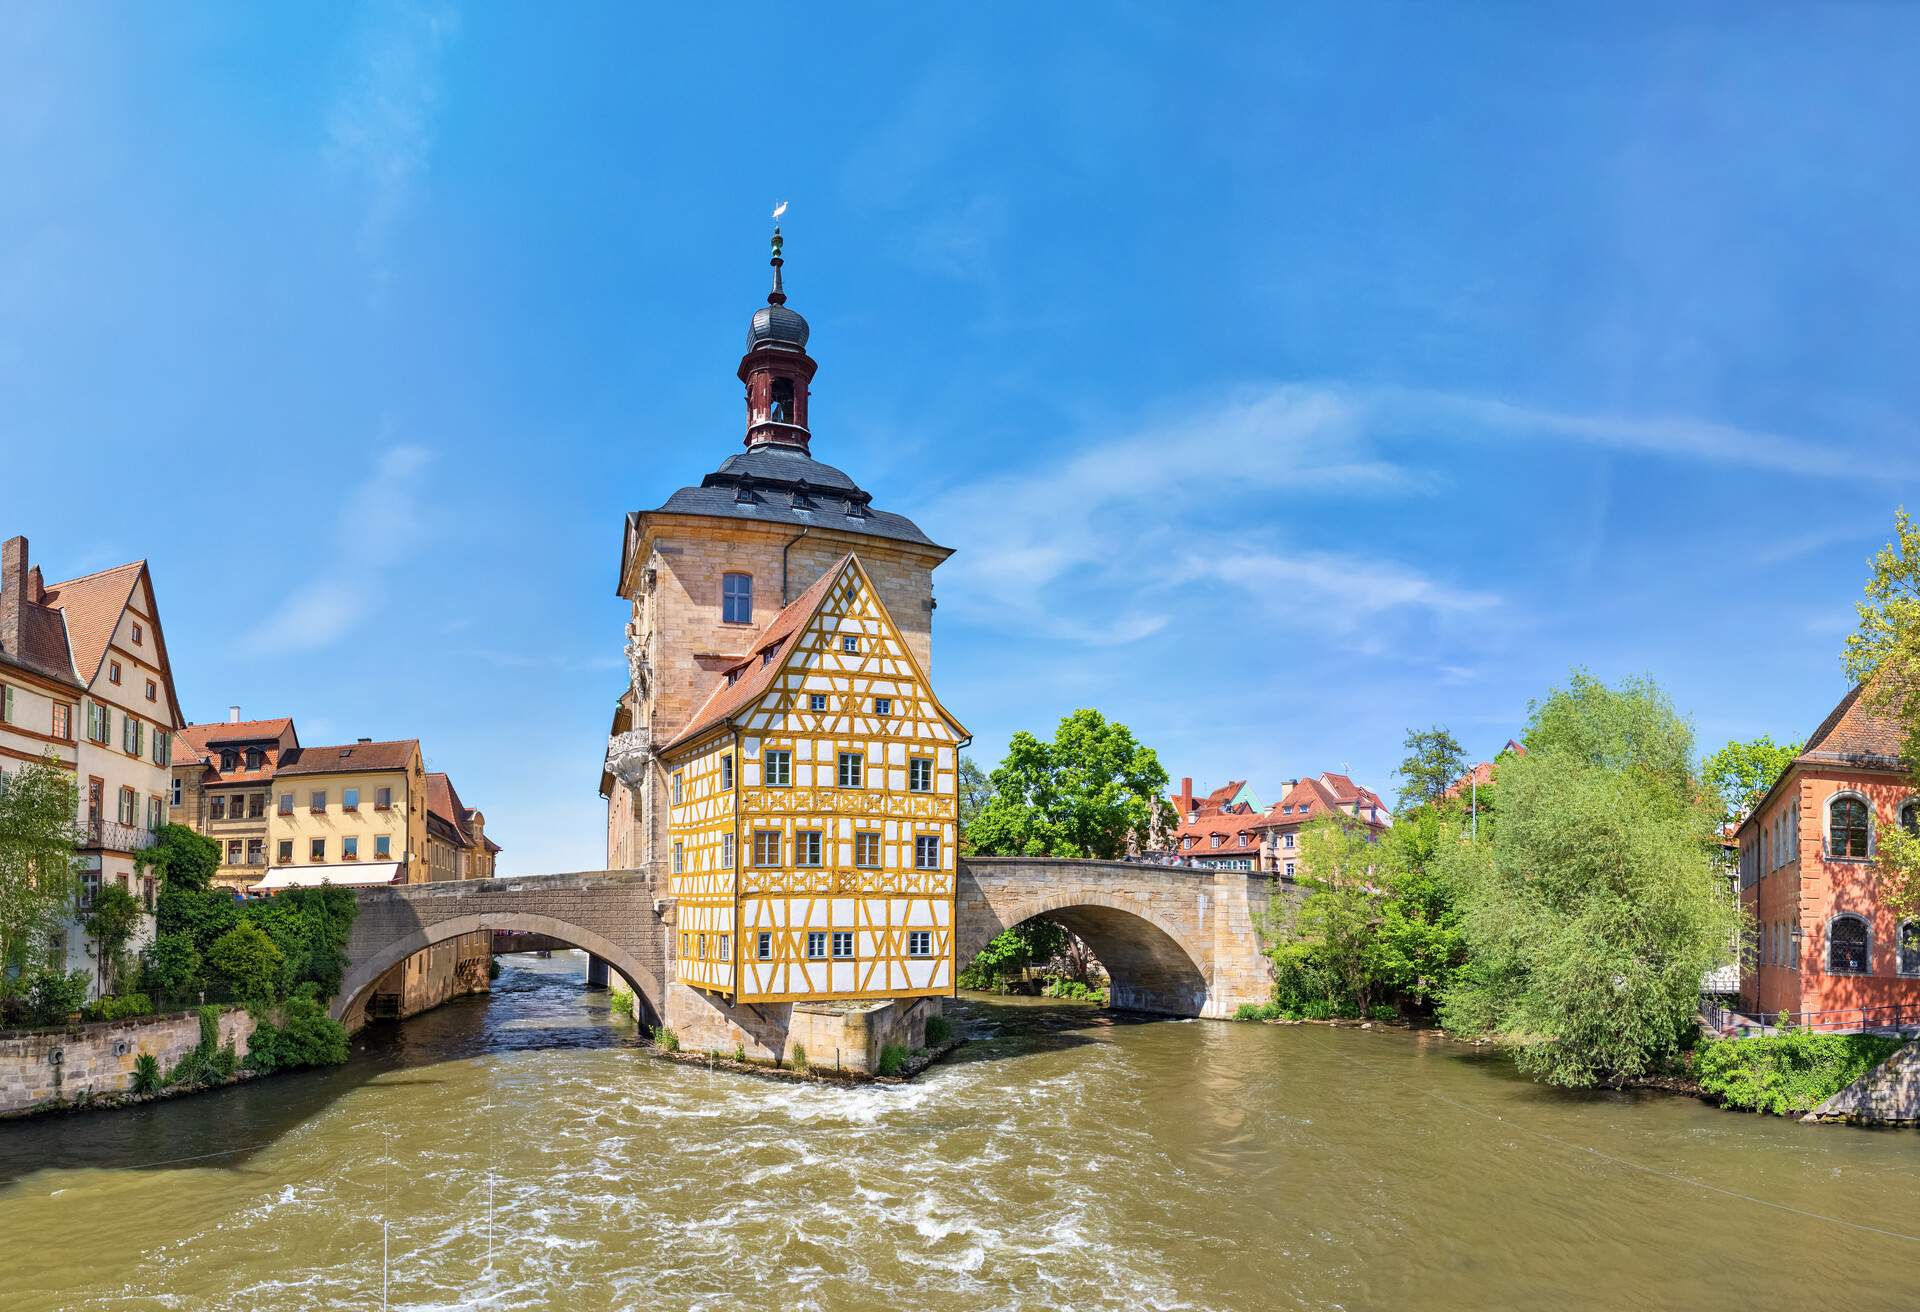 DEST_GERMANY_BAVARIA_BAMBERG_GettyImages-857768652